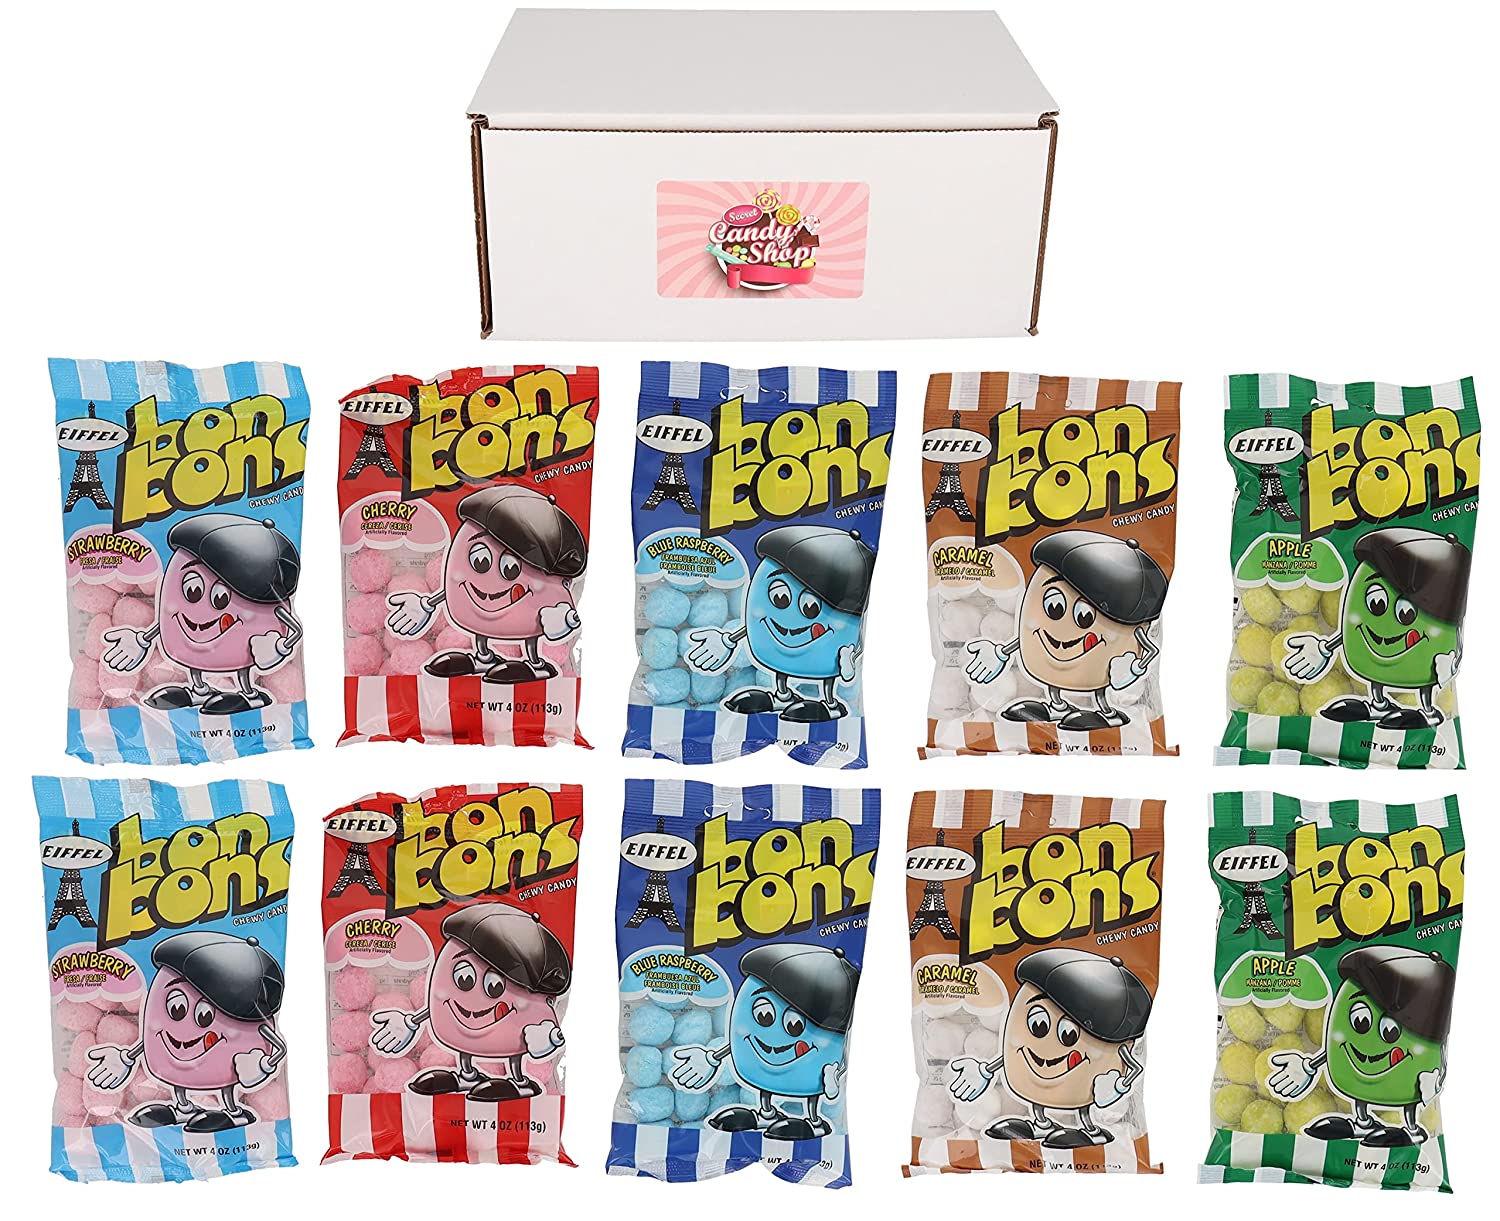 Eiffel Bon Bons Chewy Candy Variety Pack of 5 flavors (2 of each, total of 10)